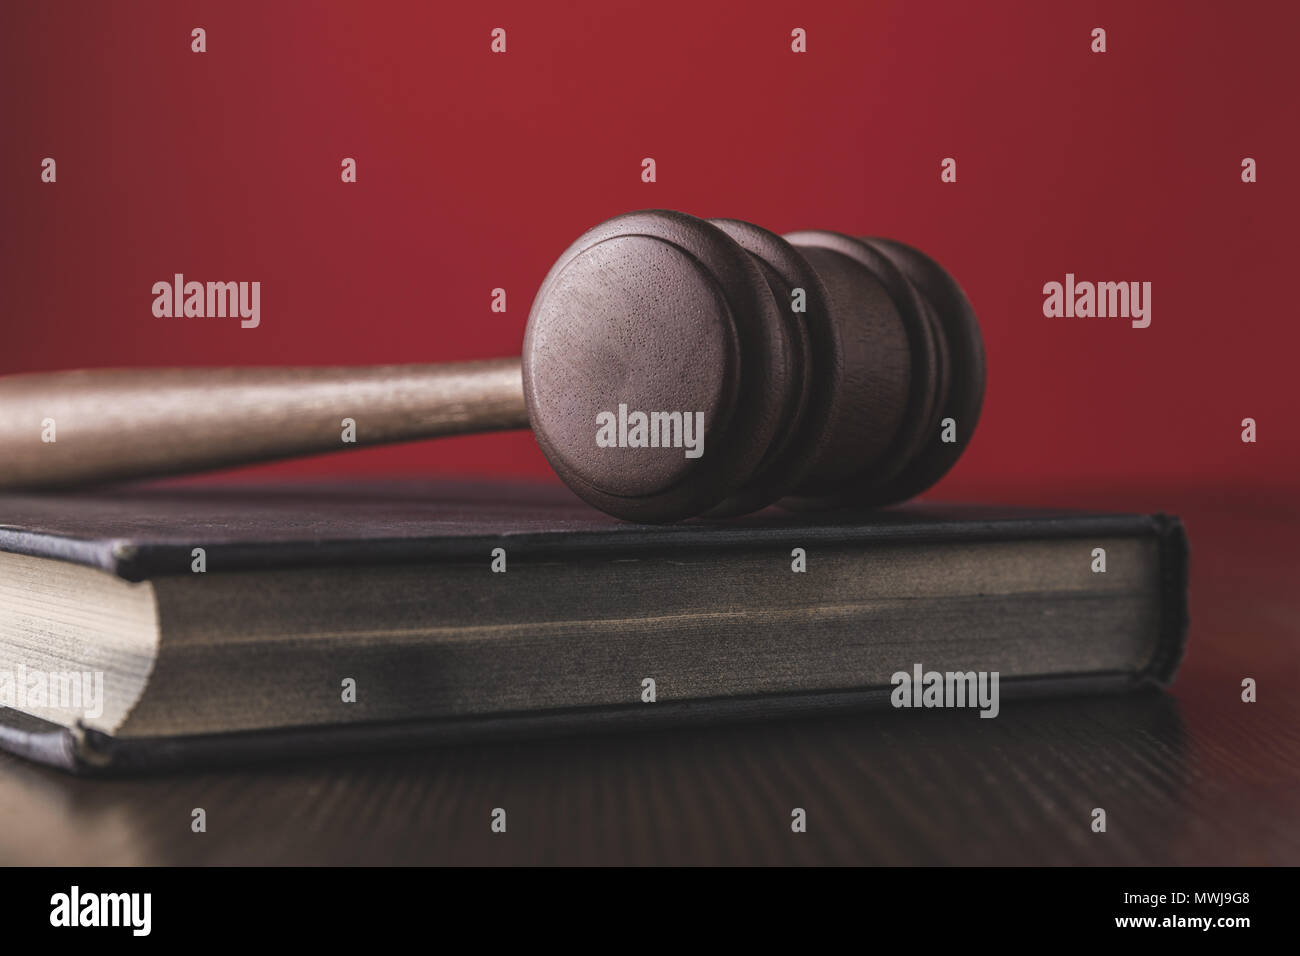 juridical book with hammer on wooden table, law concept Stock Photo